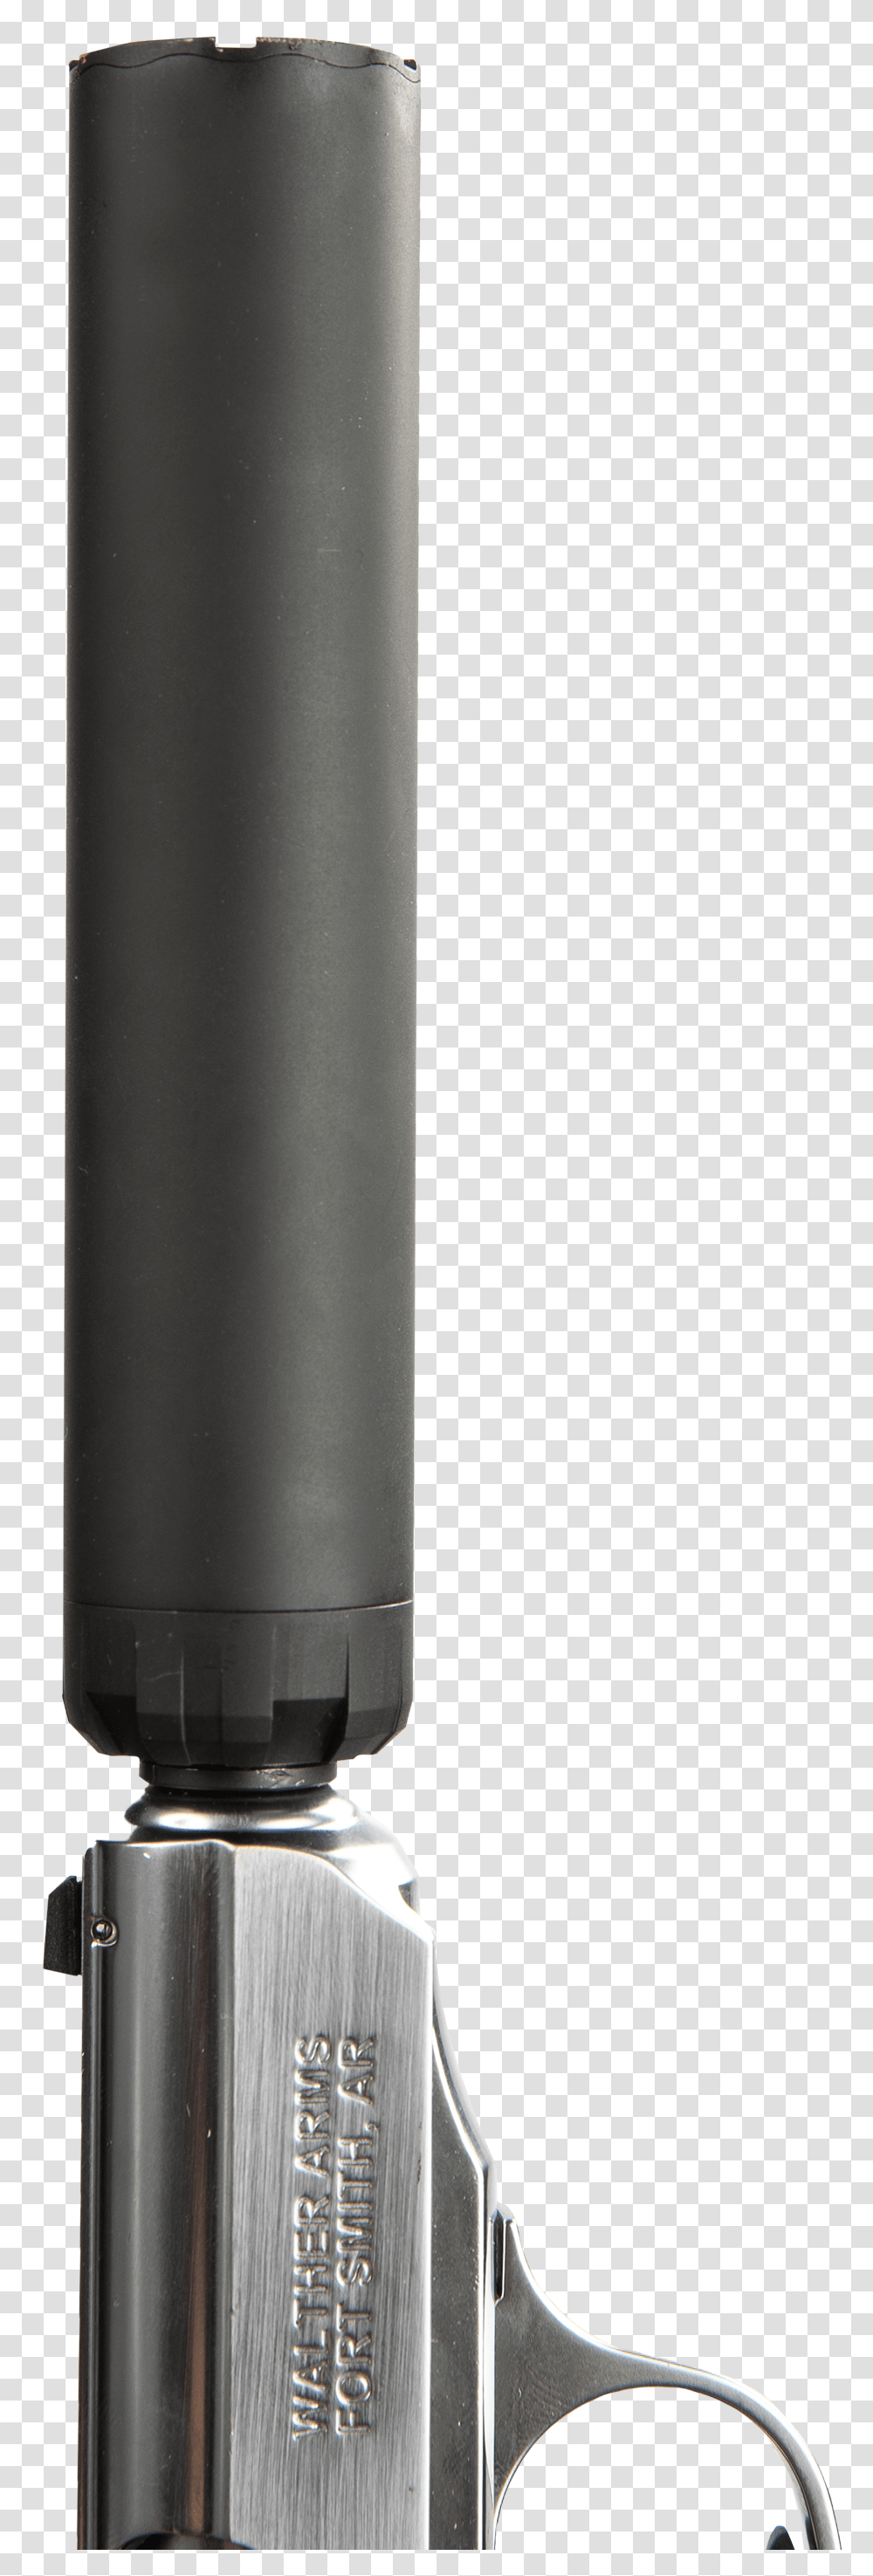 Sparrow Teleconverter, Cylinder, Electrical Device, Microphone, Cosmetics Transparent Png